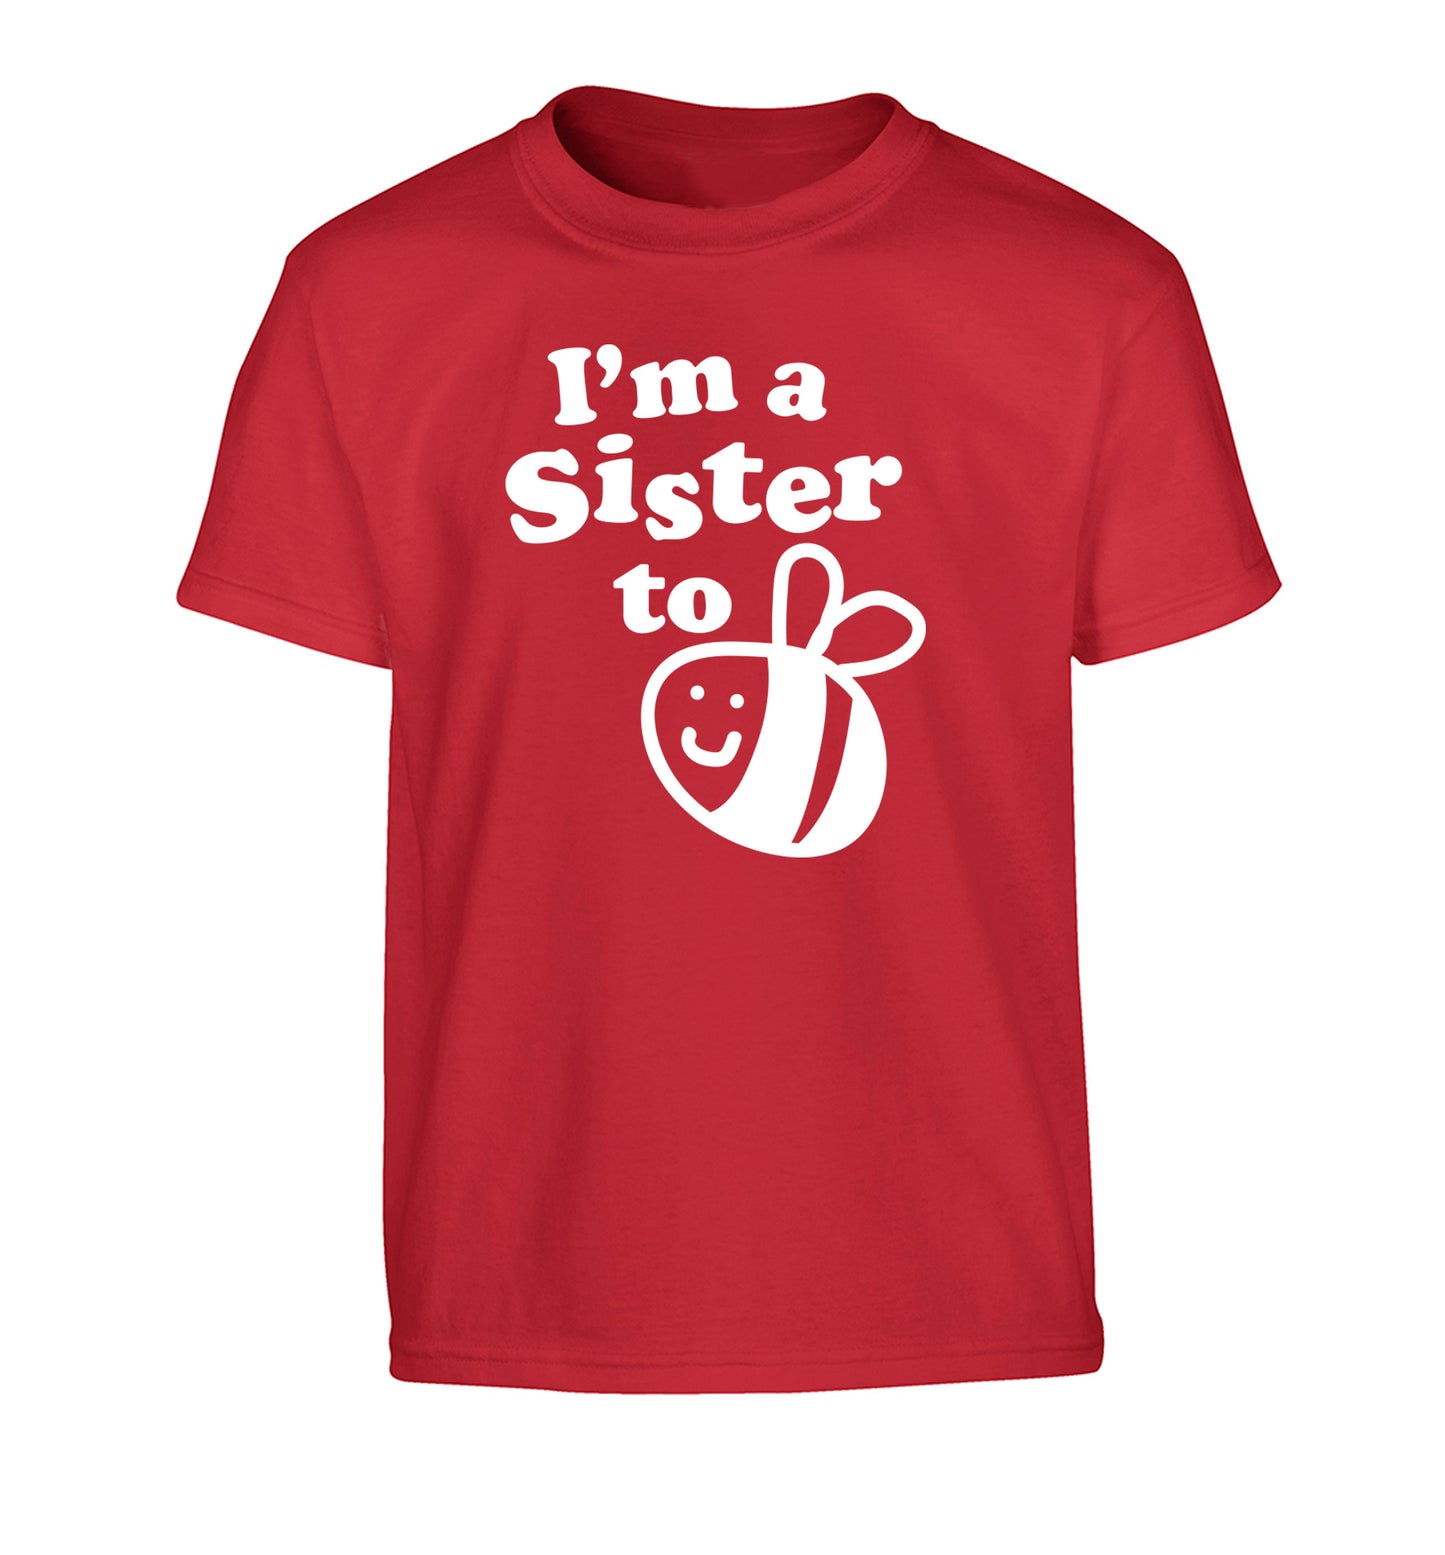 I'm a sister to be Children's red Tshirt 12-14 Years